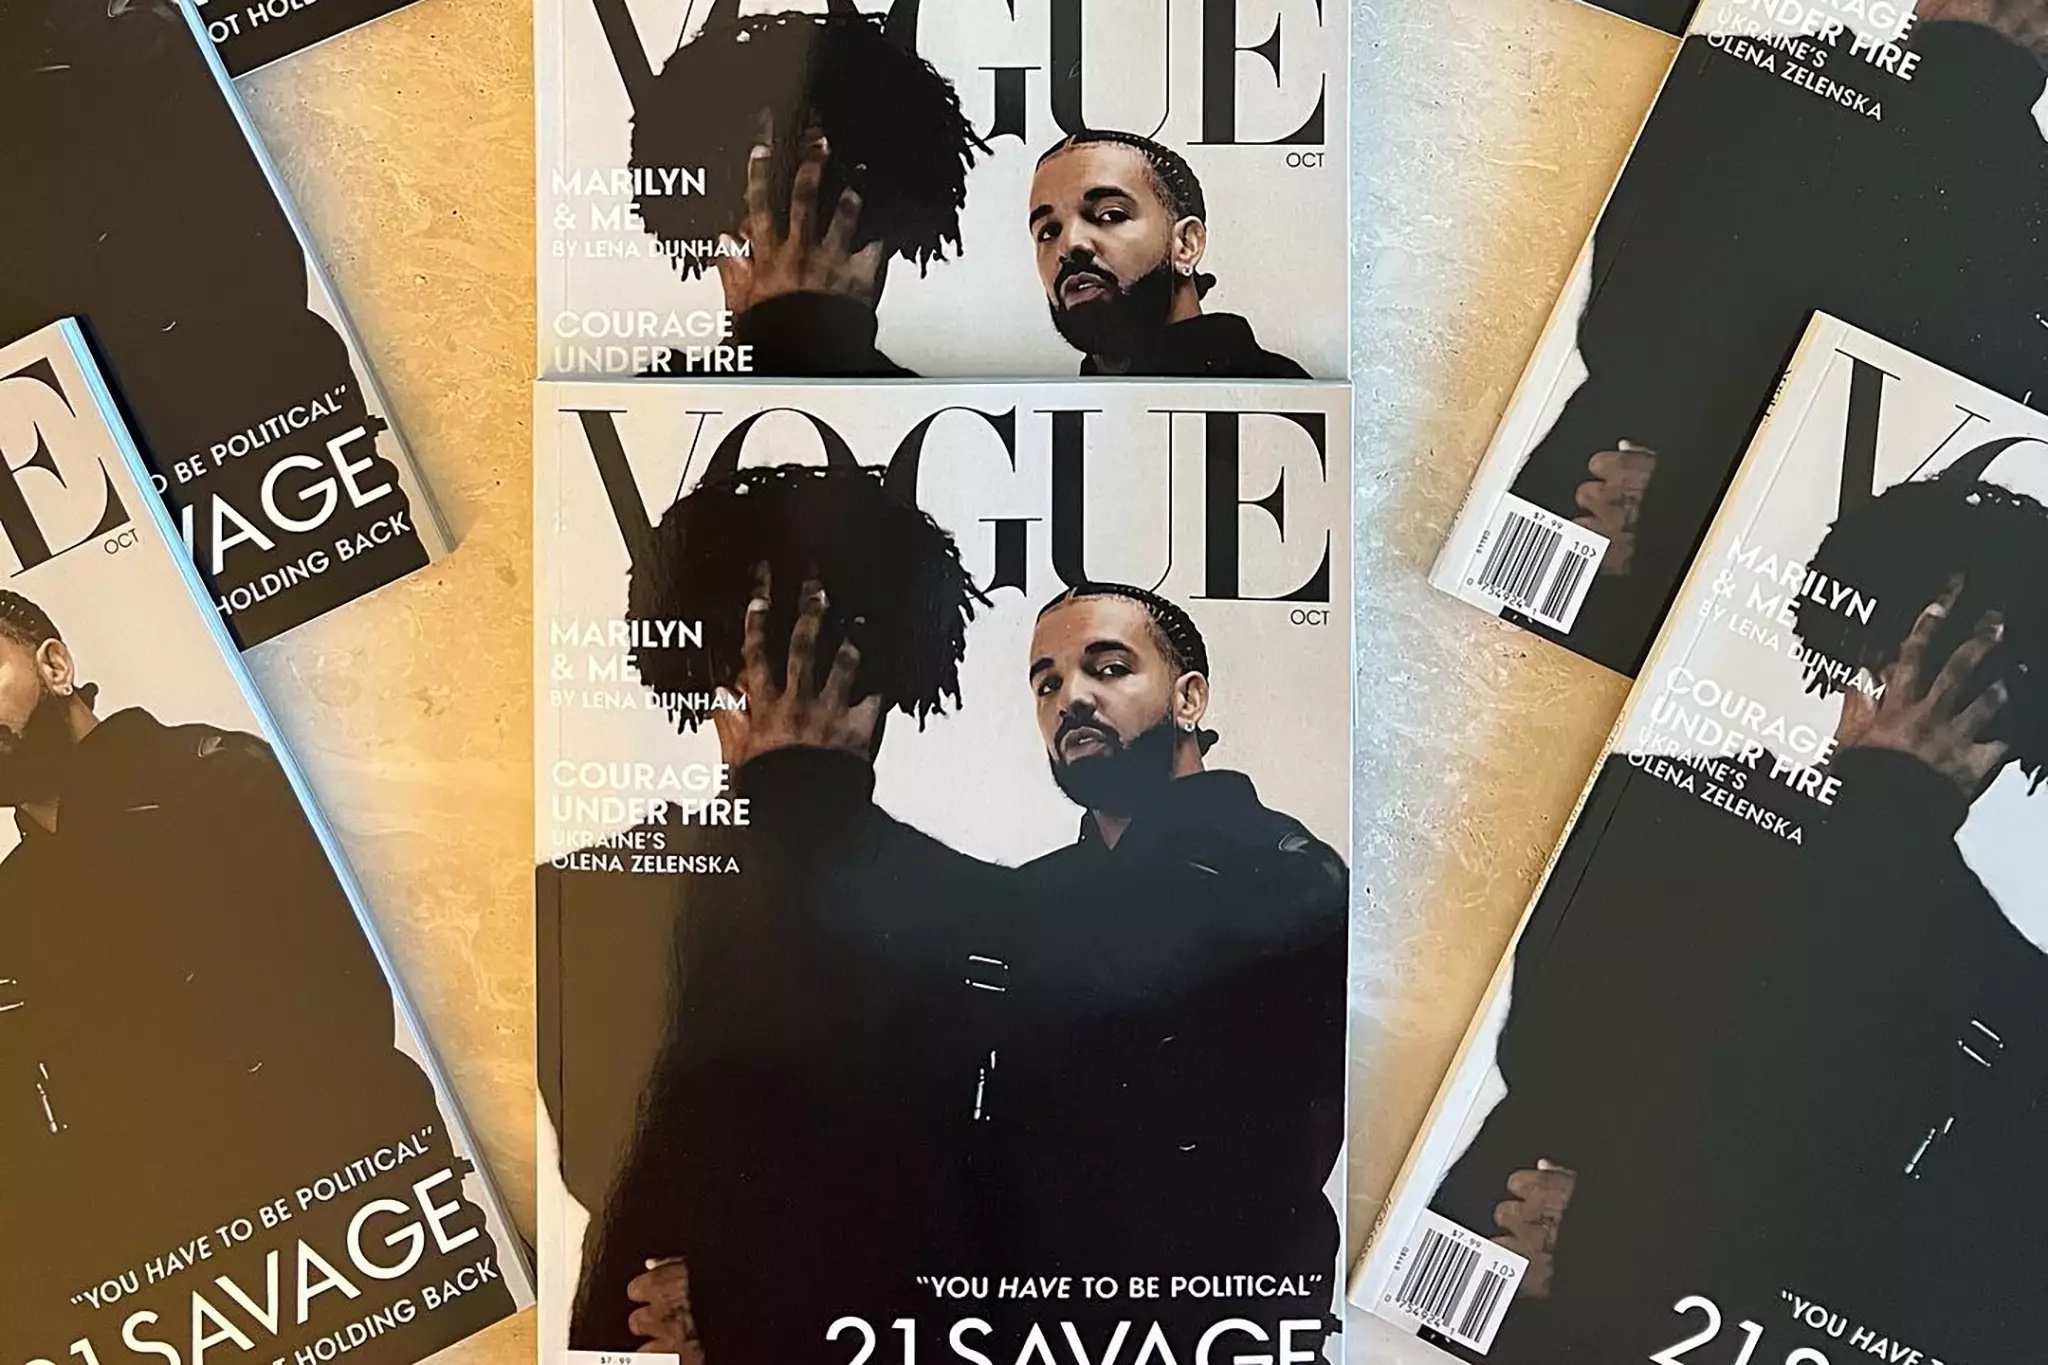 Drake and 21 Savage are getting Sued by ‘Vogue’